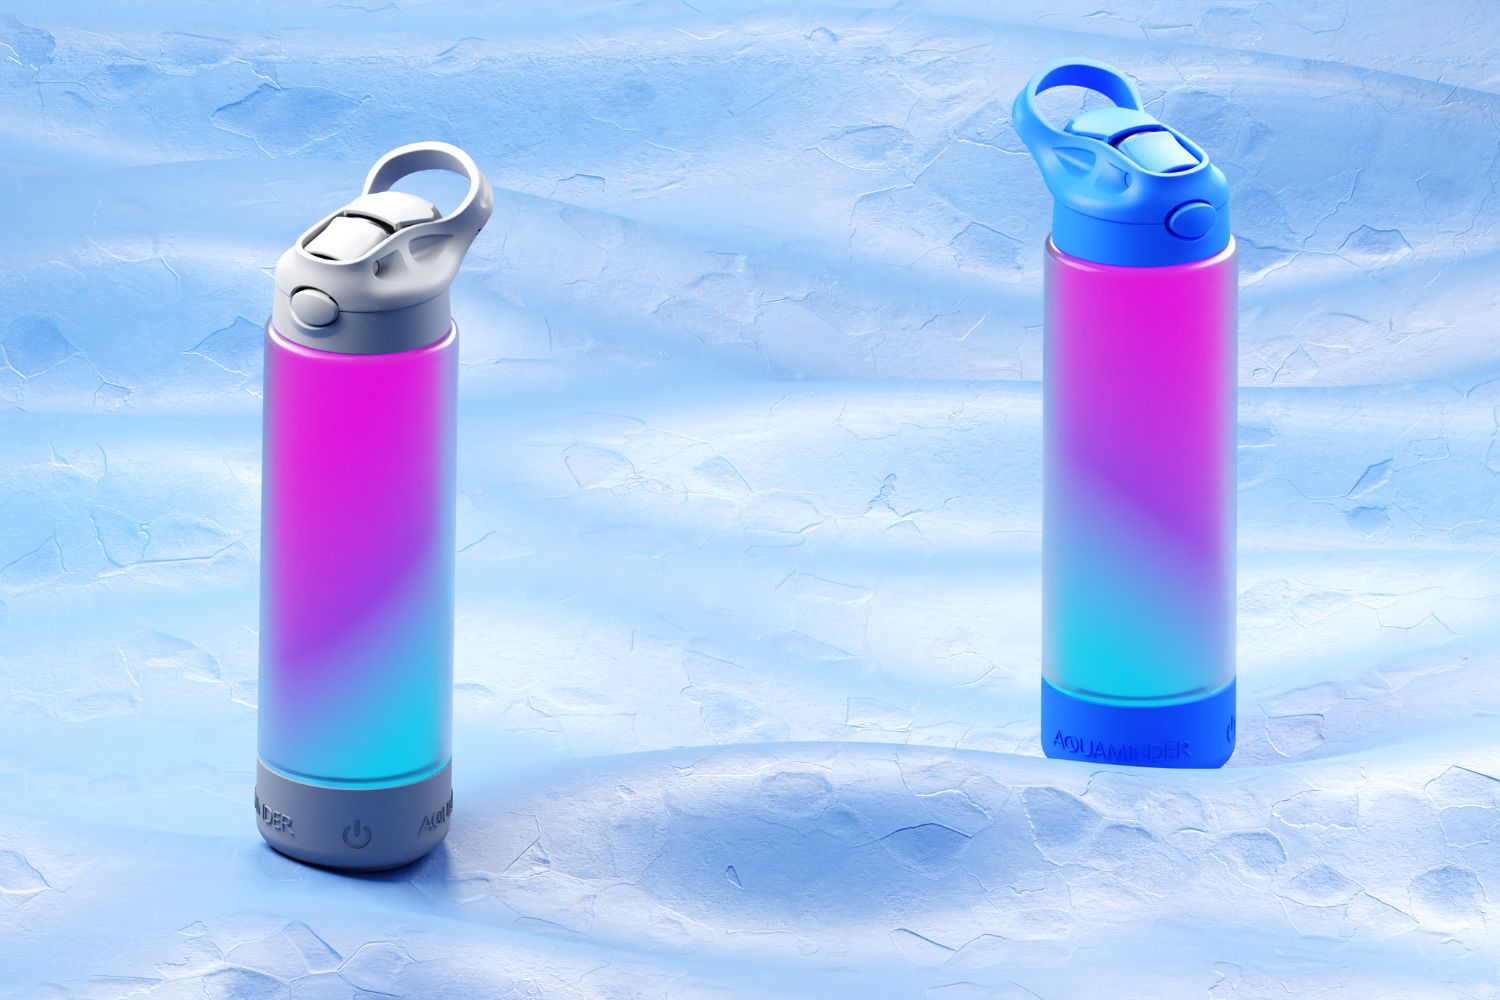 Aquaminder smart water bottle for corporate gifting